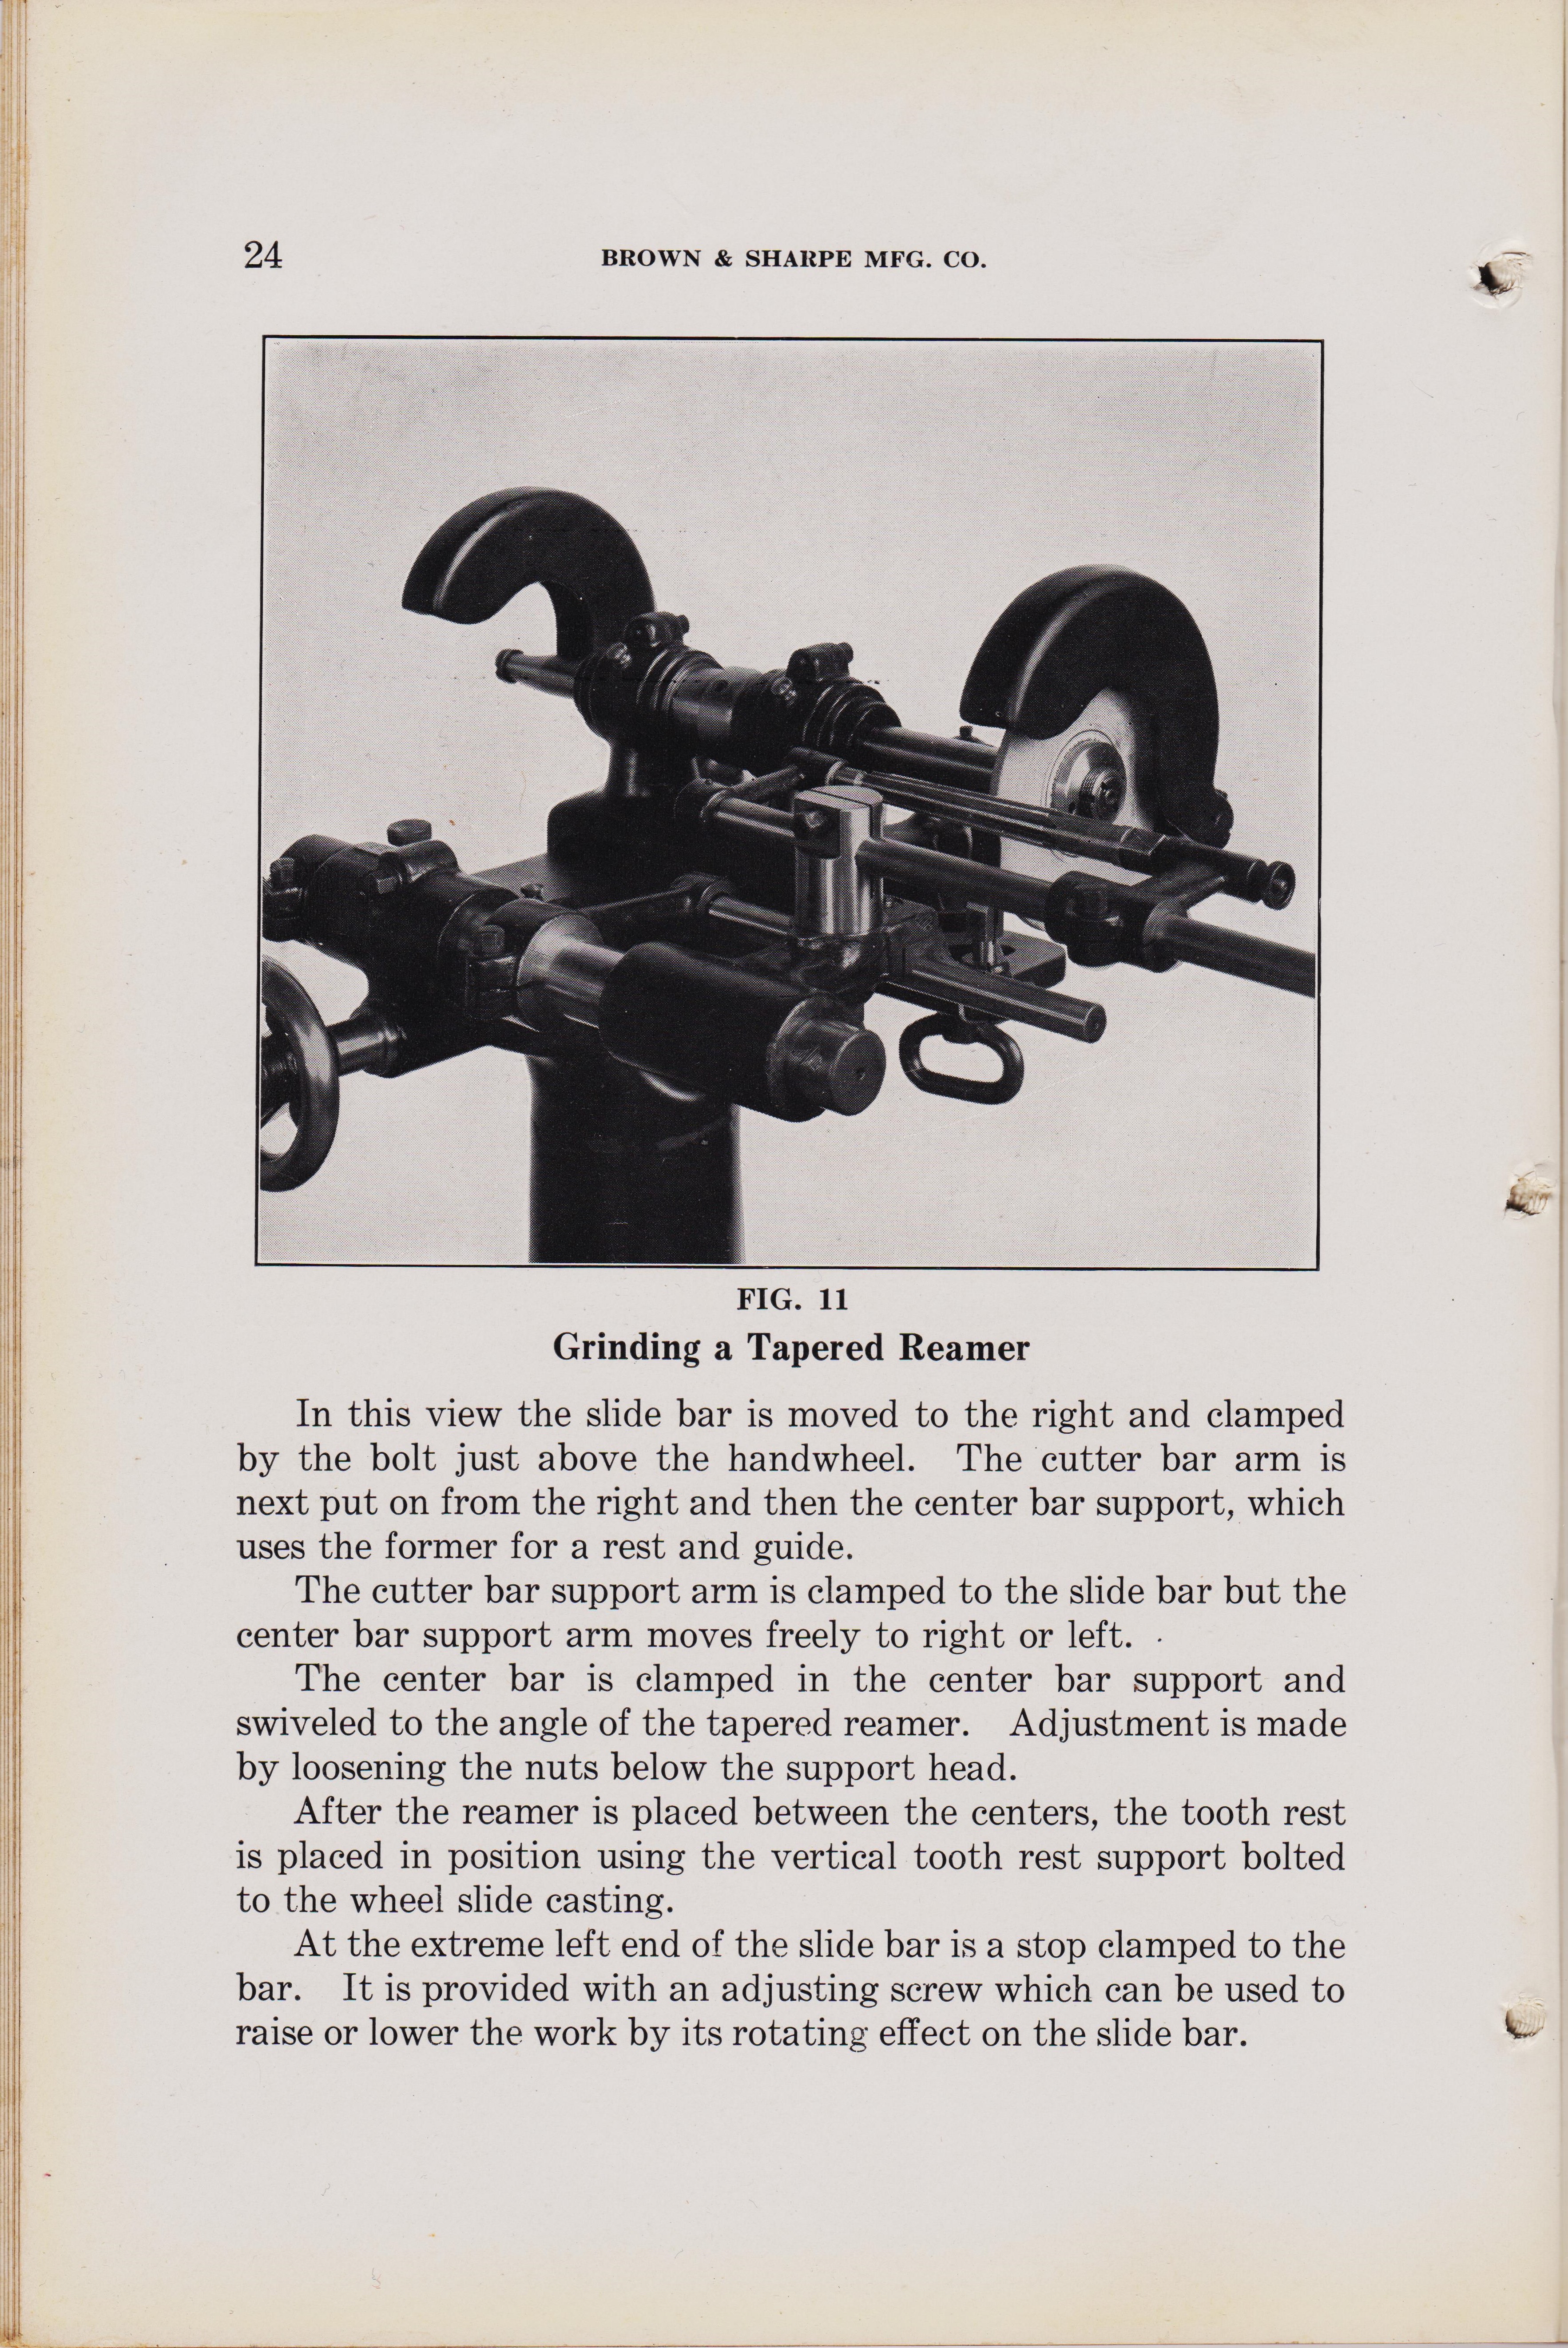 https://antiquemachinery.com/images-2020/Universal-Cutter-and-Reamer-Grinder-Machine-Brown-and-Sharpe-Mfg-Co-1929-No2-pg-24-Sharpening-a-Tapered-Reamer.jpeg